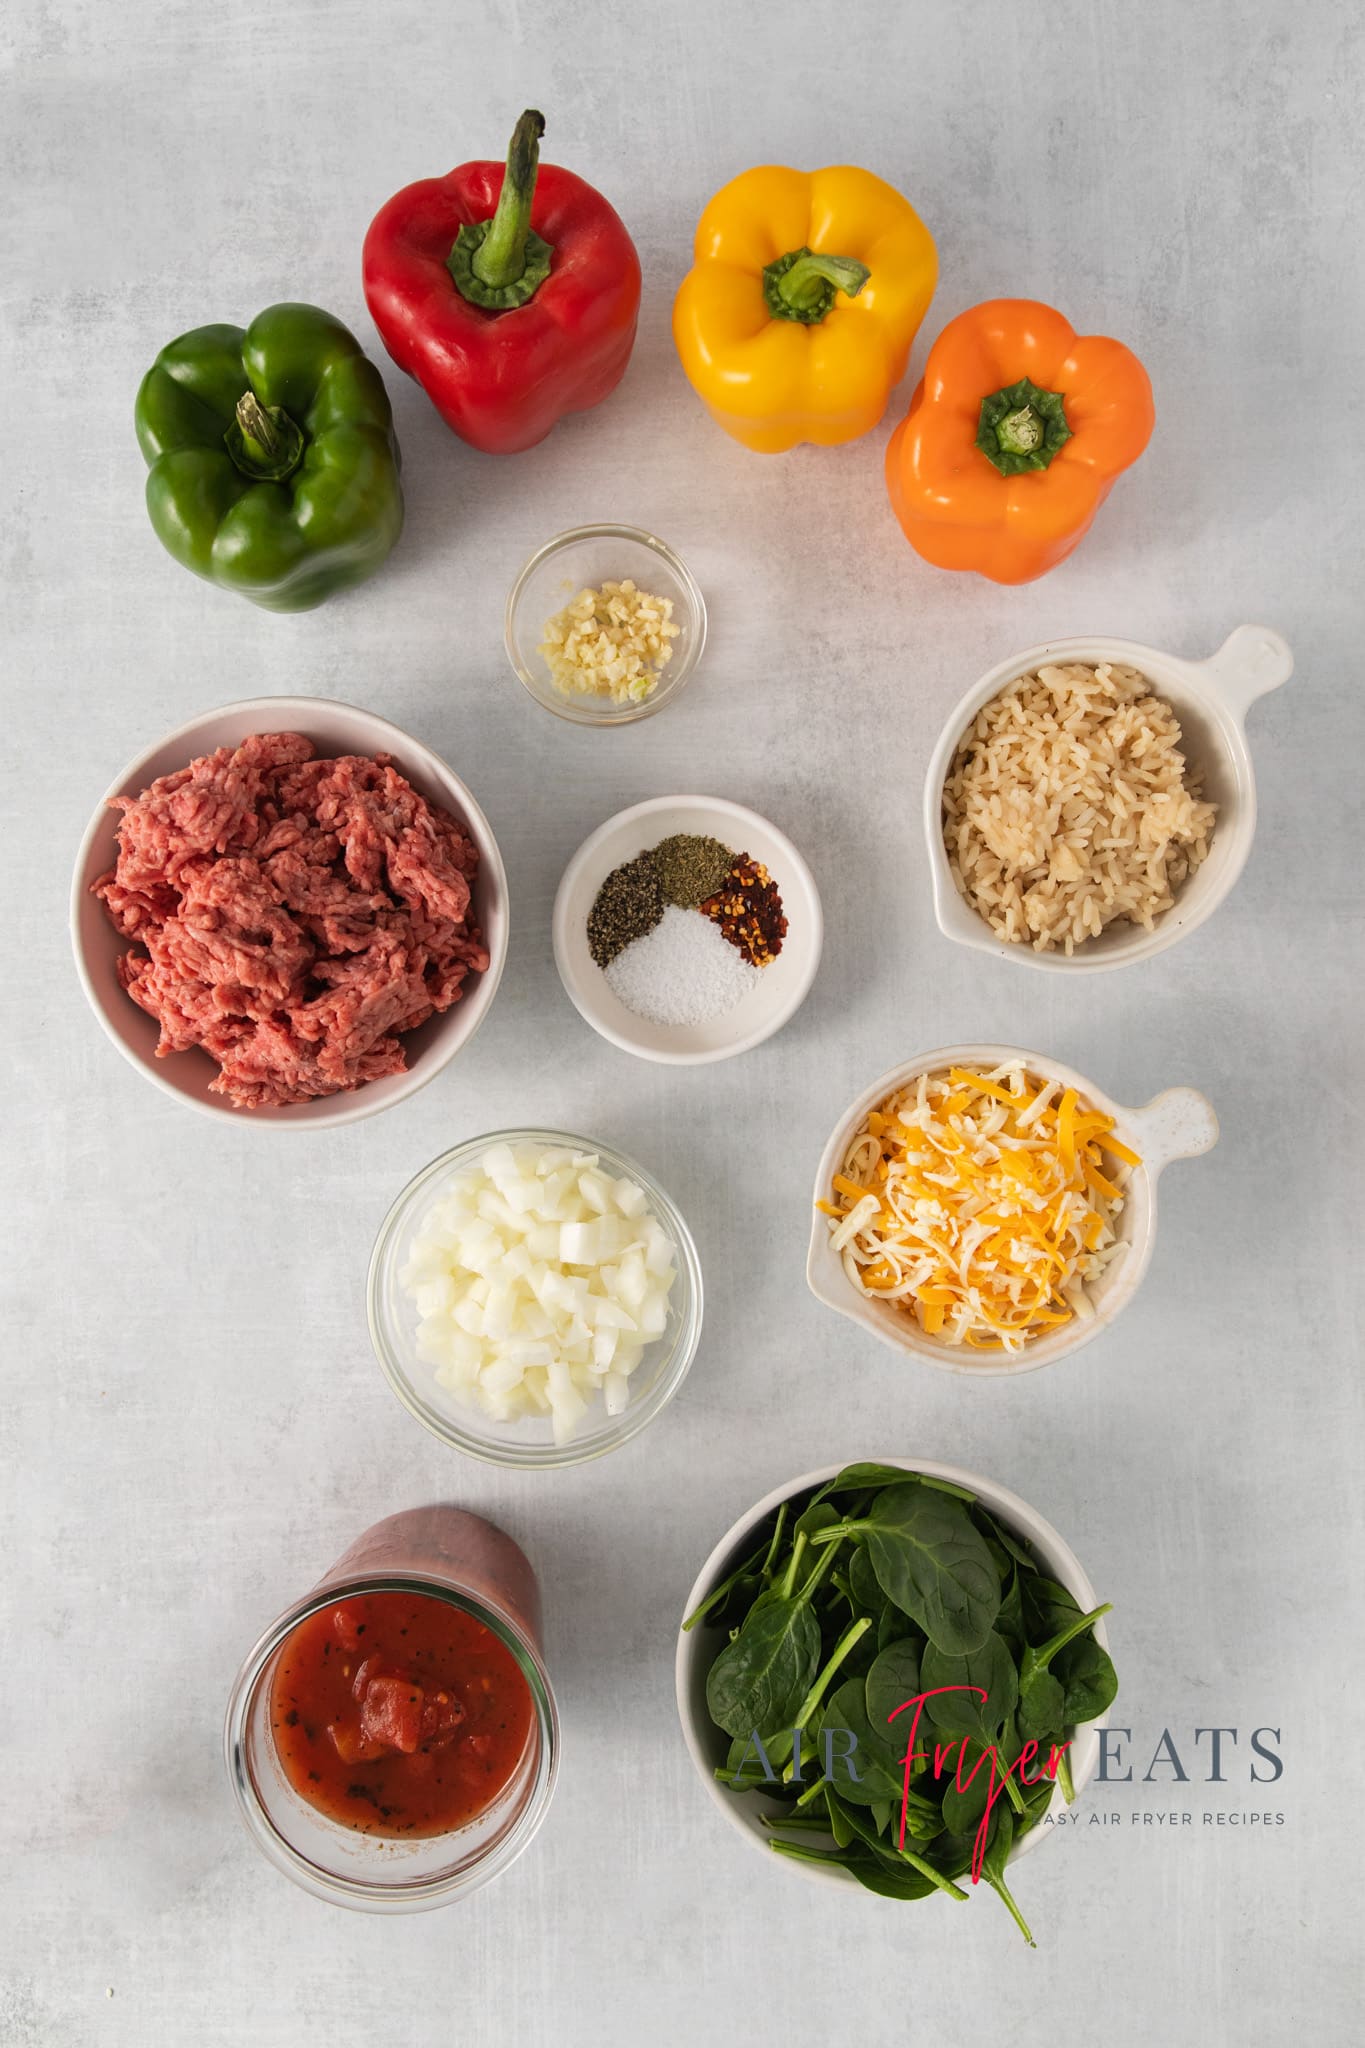 The ingredients needed to make homemade italian style stuffed peppers